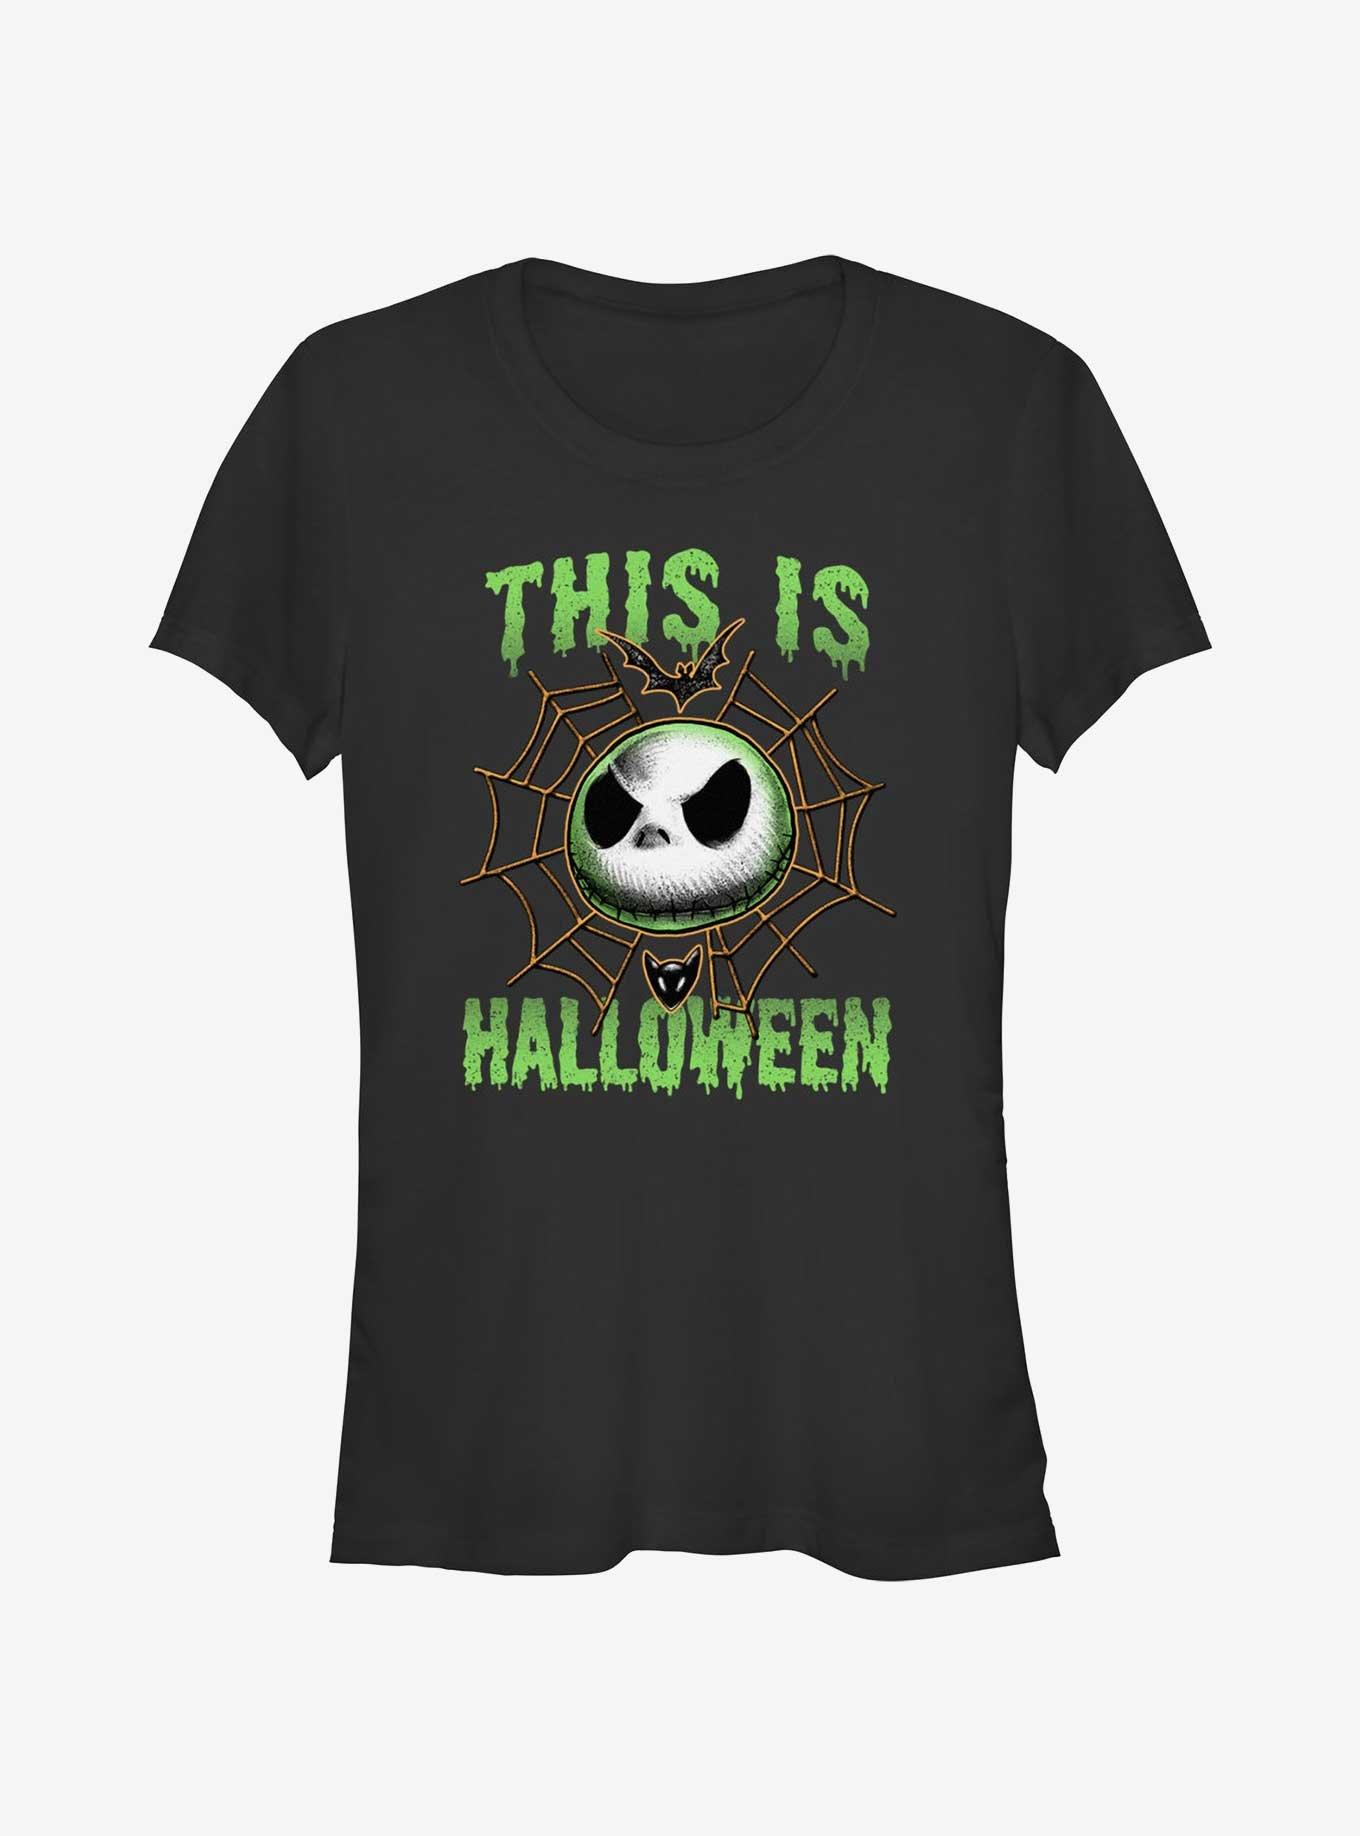 Hot Topic Disney The Nightmare Before Christmas Jack Skellington This Is  Halloween Girls T-Shirt